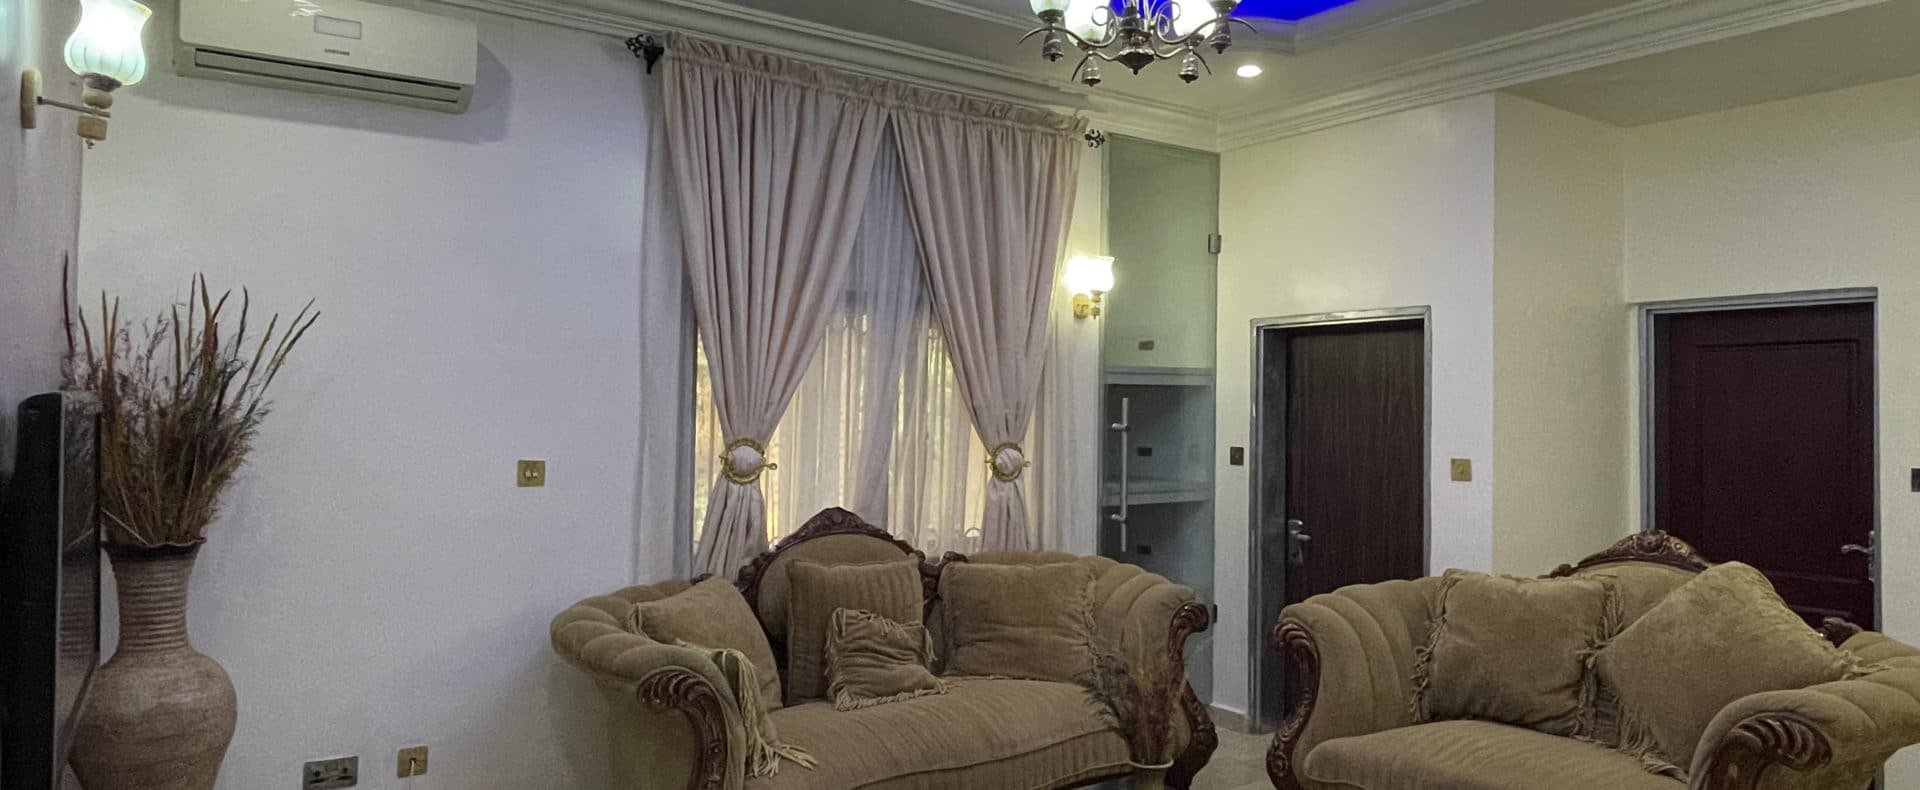 House 8 Apartment Short Let In Abuja Fct Nigeria